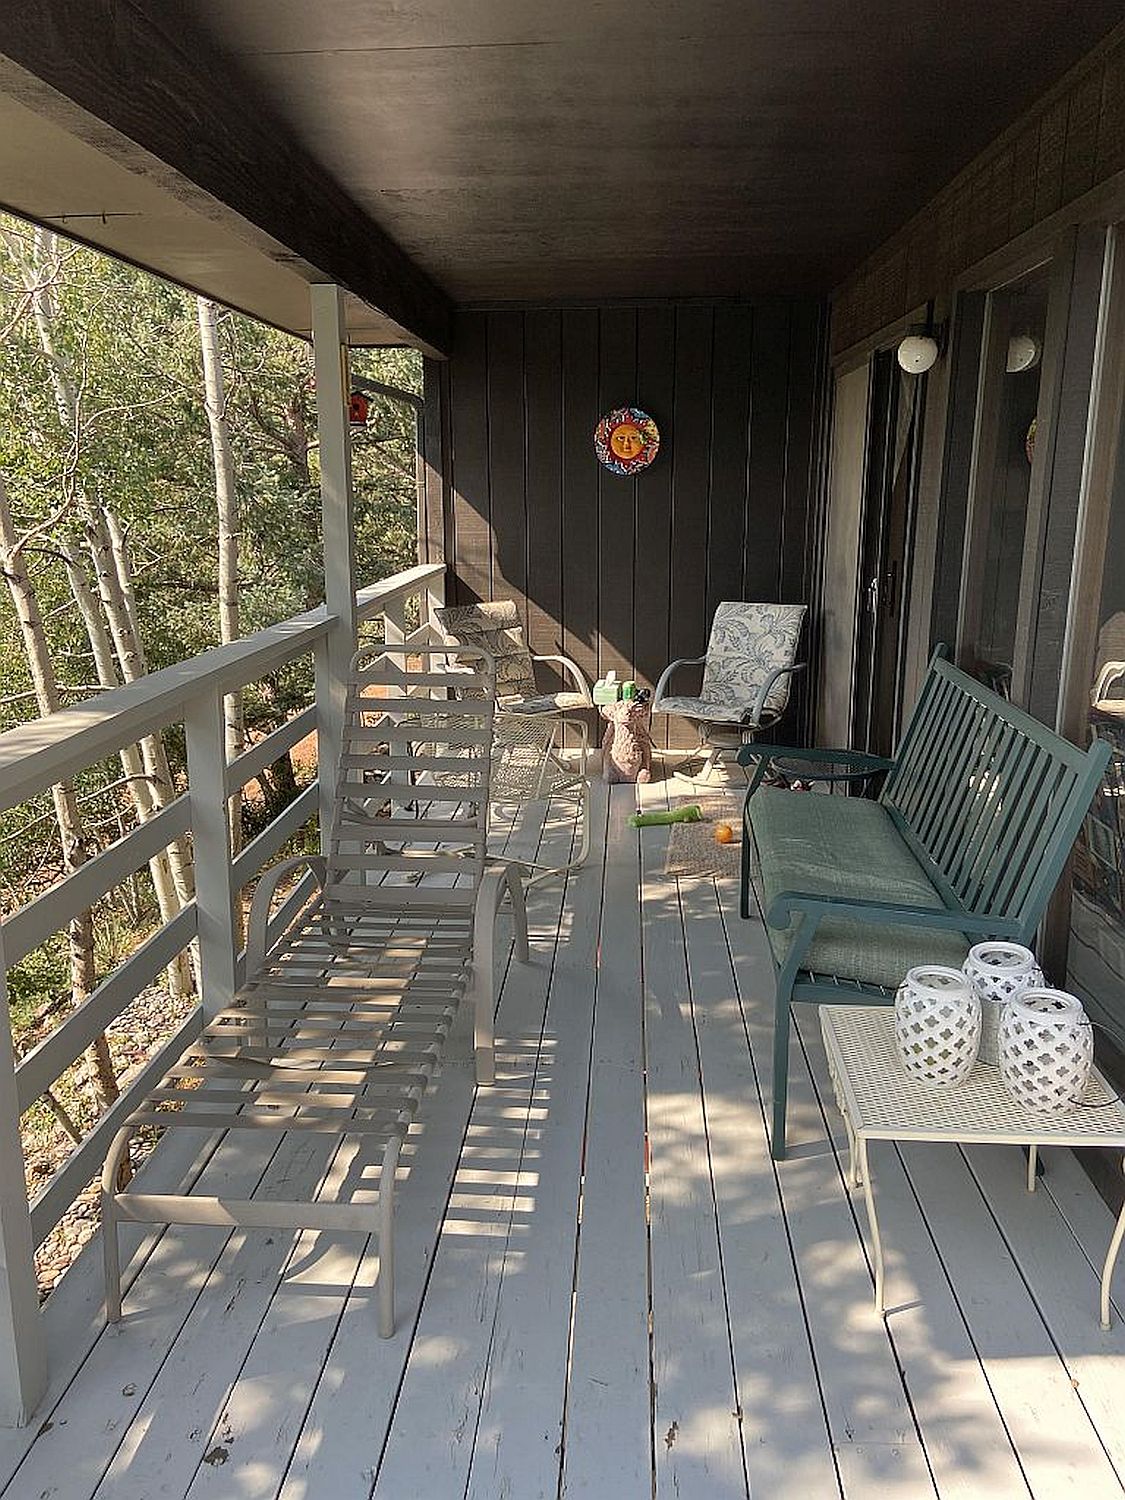 View of a redwood deck before it is removed and replaced by a custom, hardwood deck